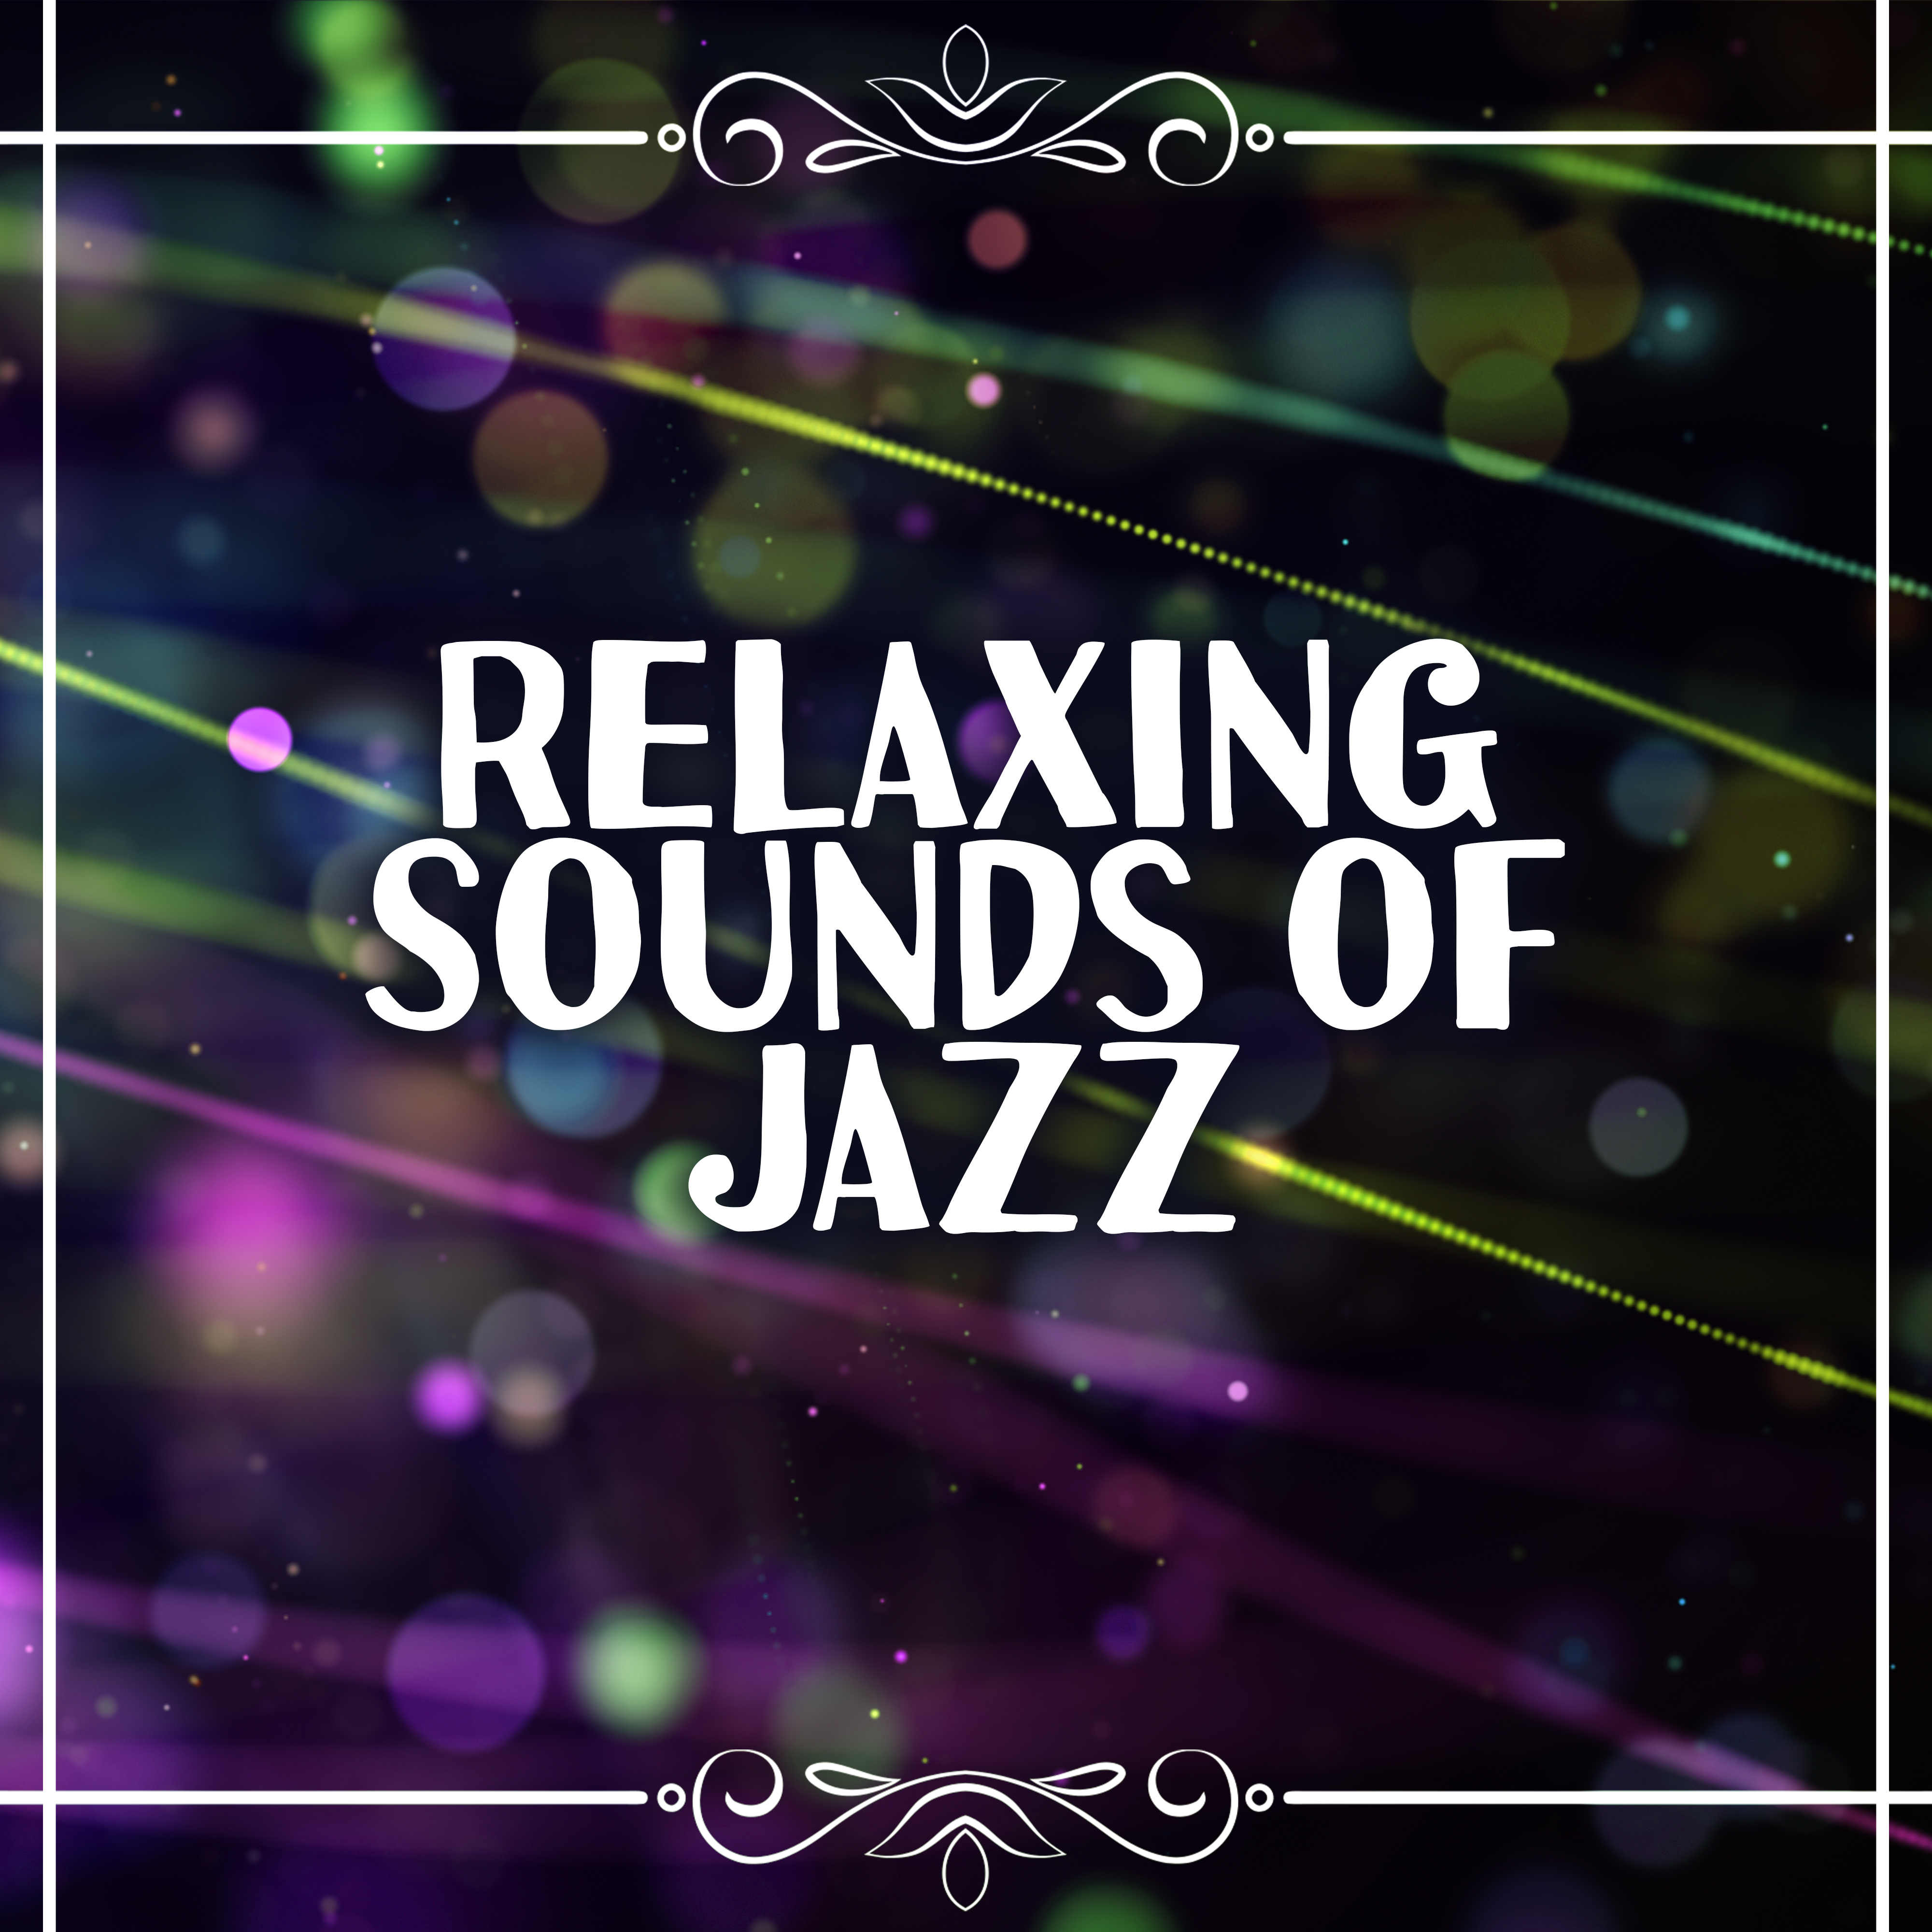 Relaxing Sounds of Jazz  Chilled Music, Soft Jazz Vibes, Sounds to Rest, Easy Listening